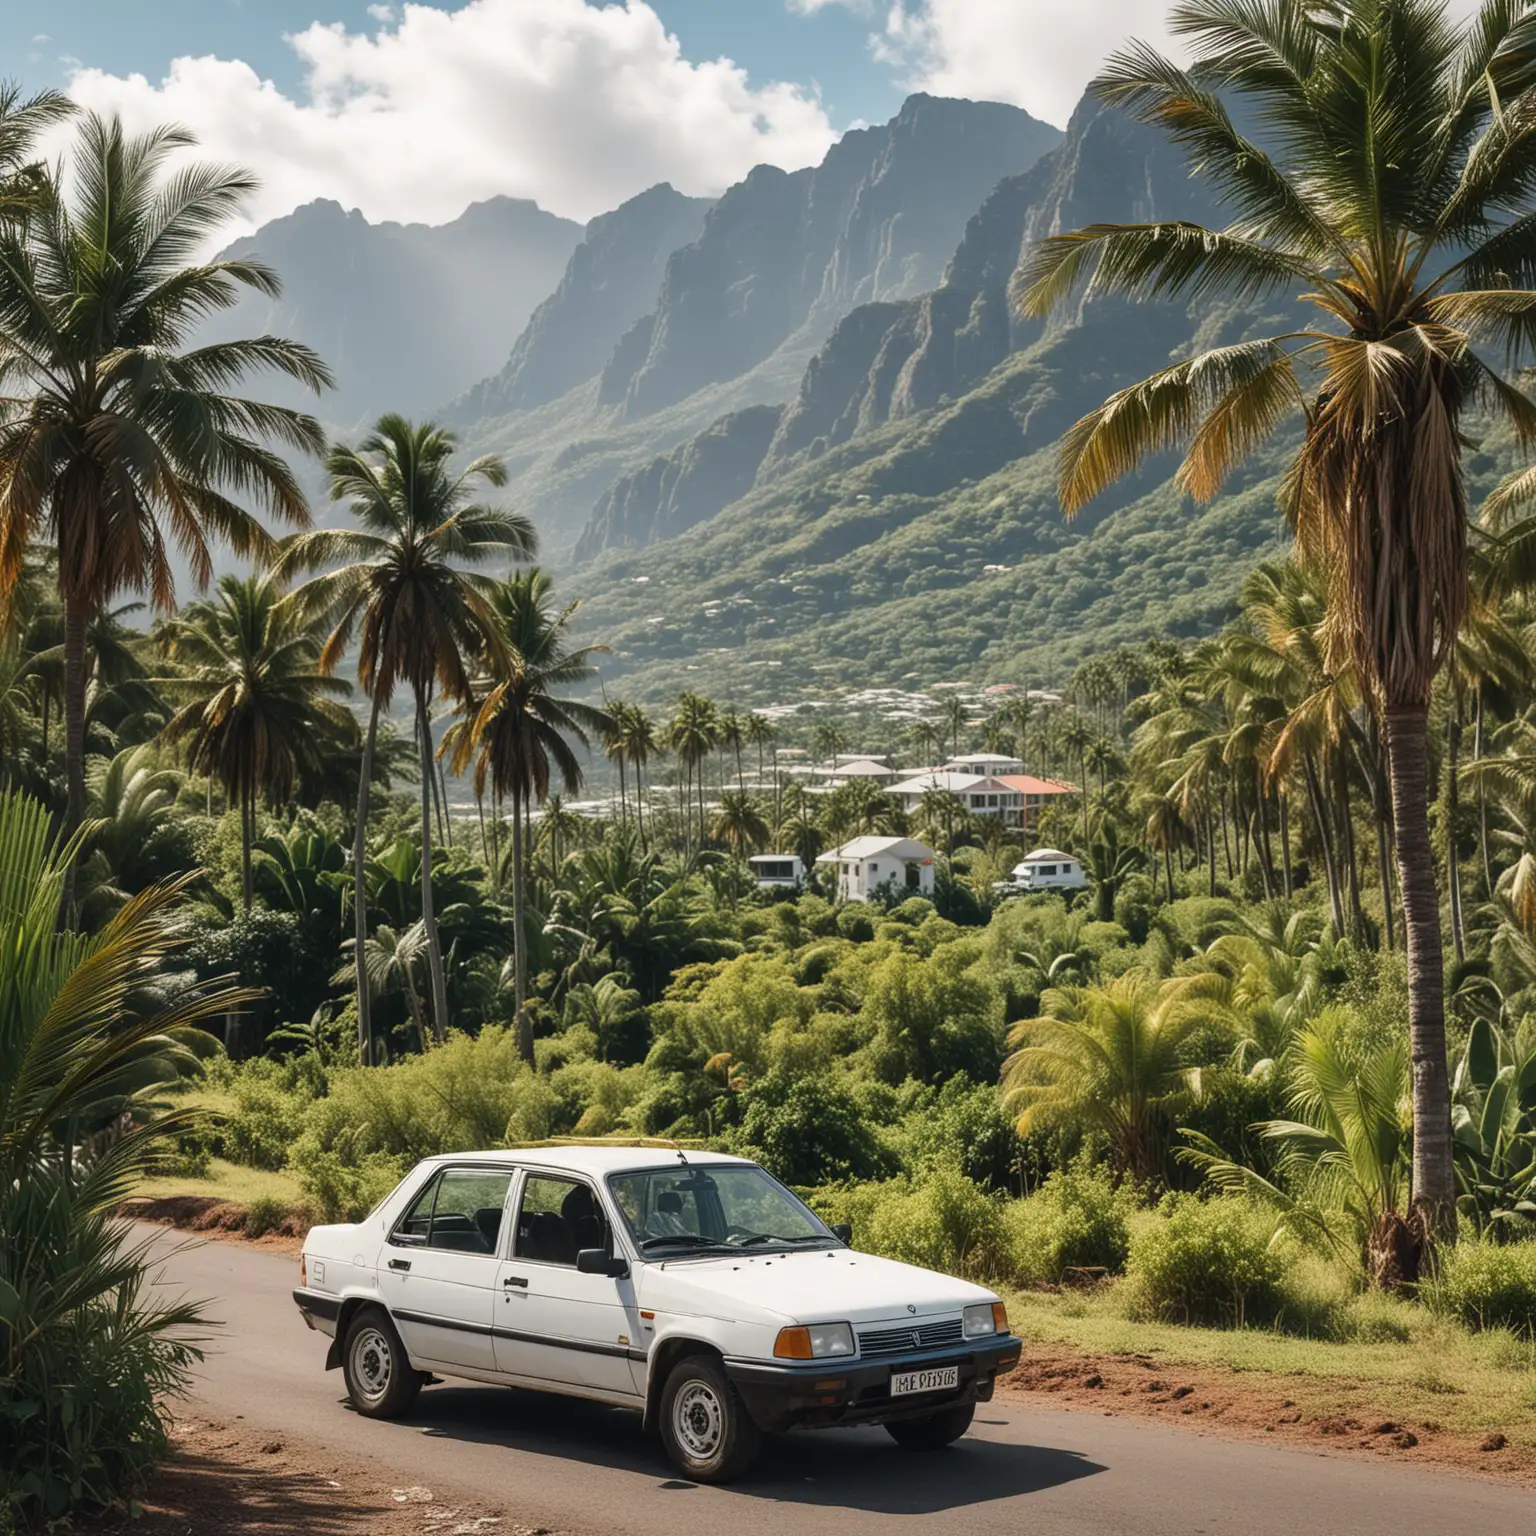 Scenic Island of Reunion Landscape with Renault 19 Car